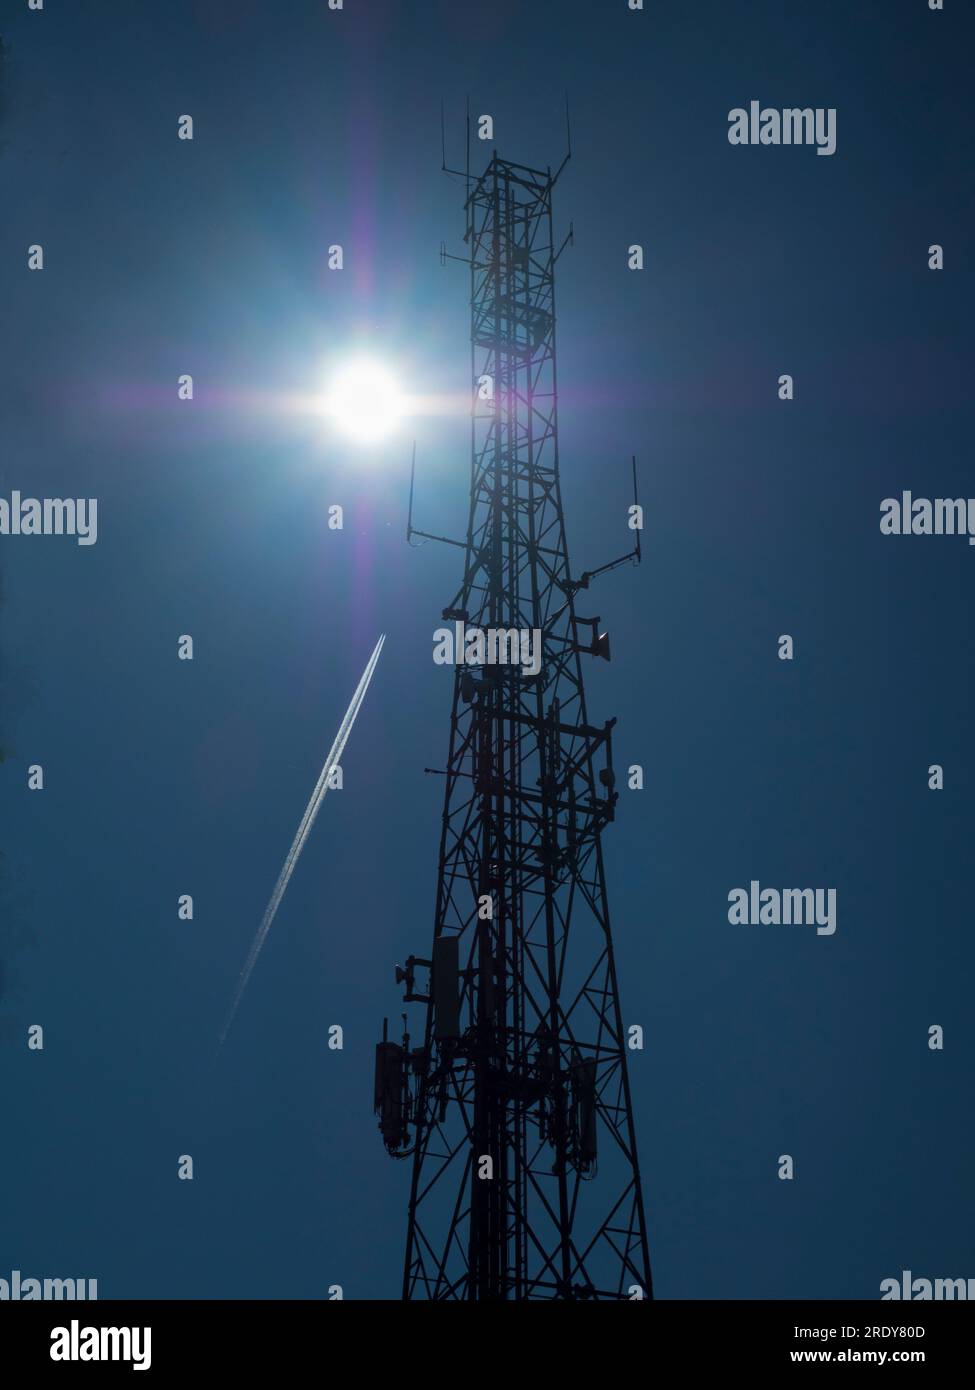 Headington, Oxford. An antenna-covered communications mast, silhouetted by the sun in a cloudless mid-summer sky, Far overhead, a passing aircraft and Stock Photo